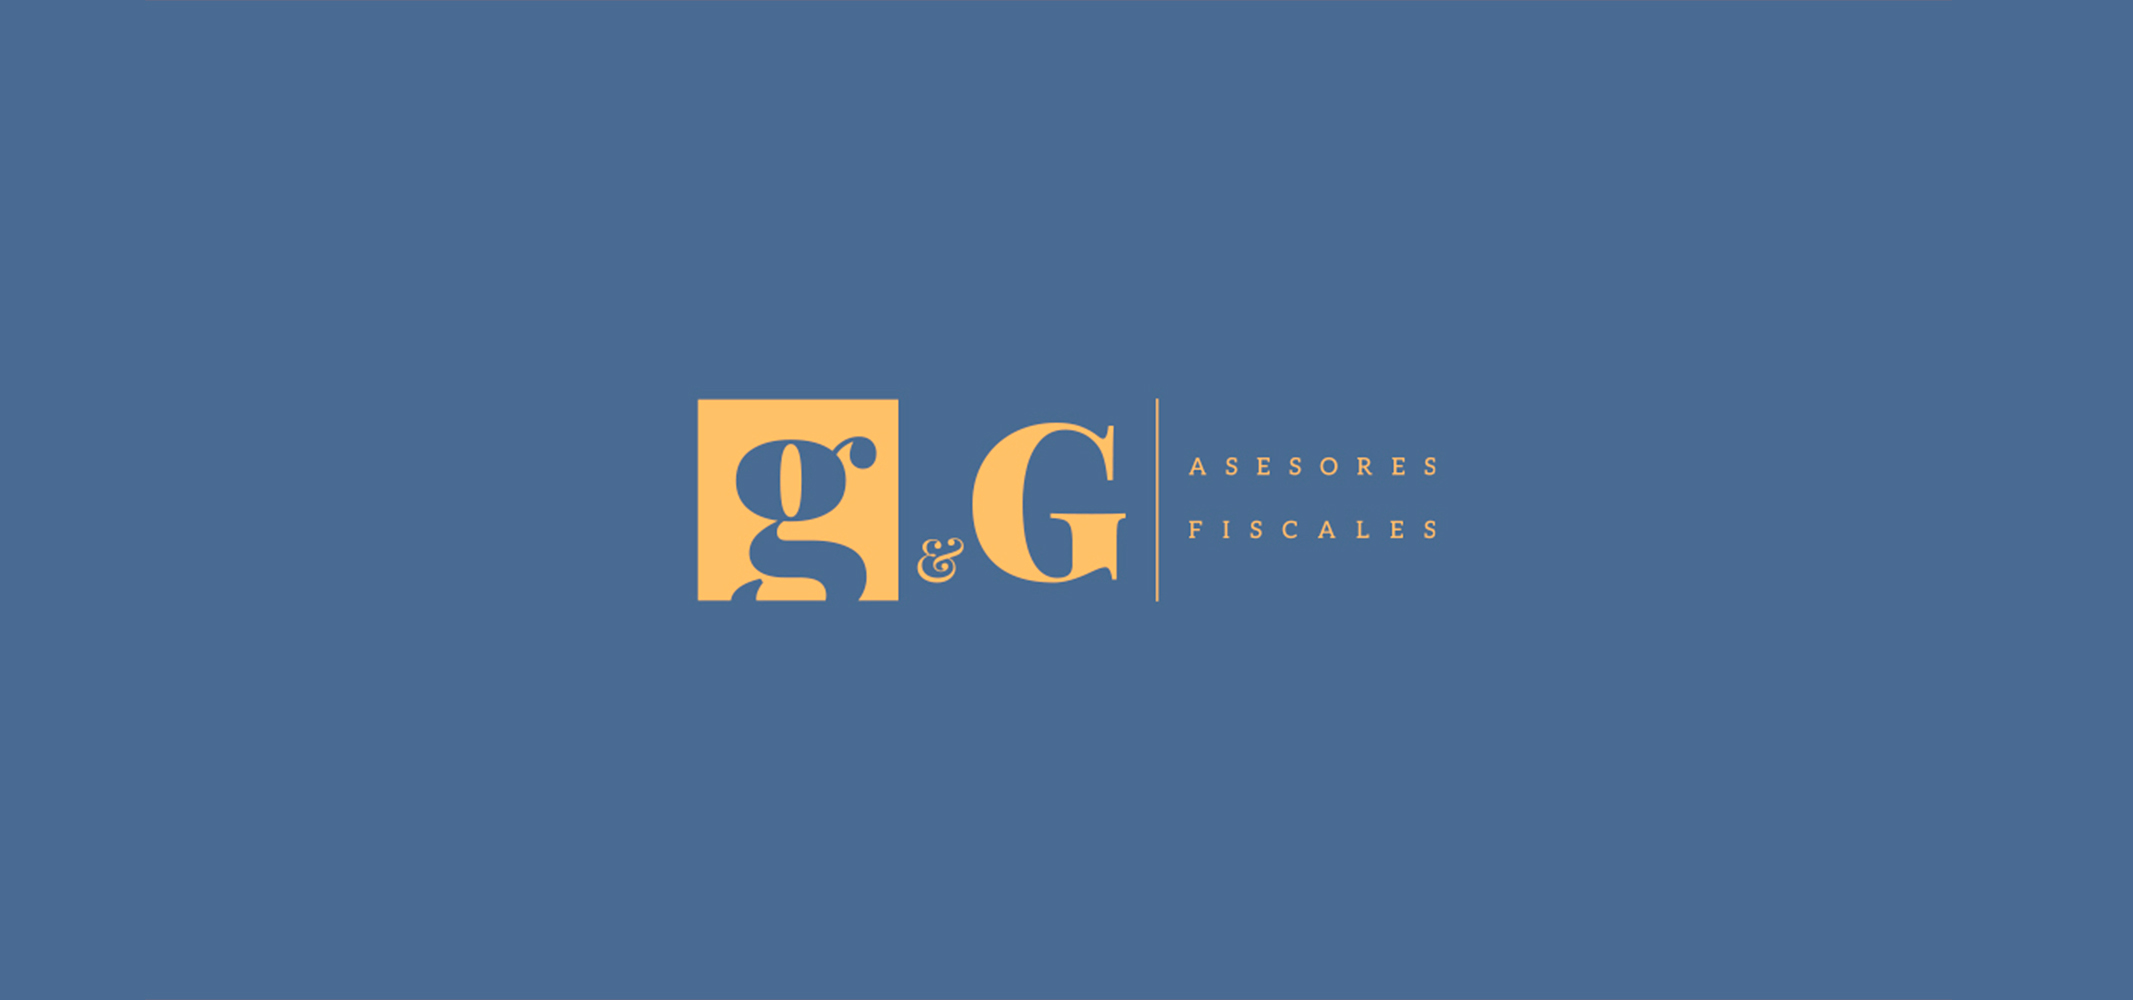 G&G asesoria fiscal